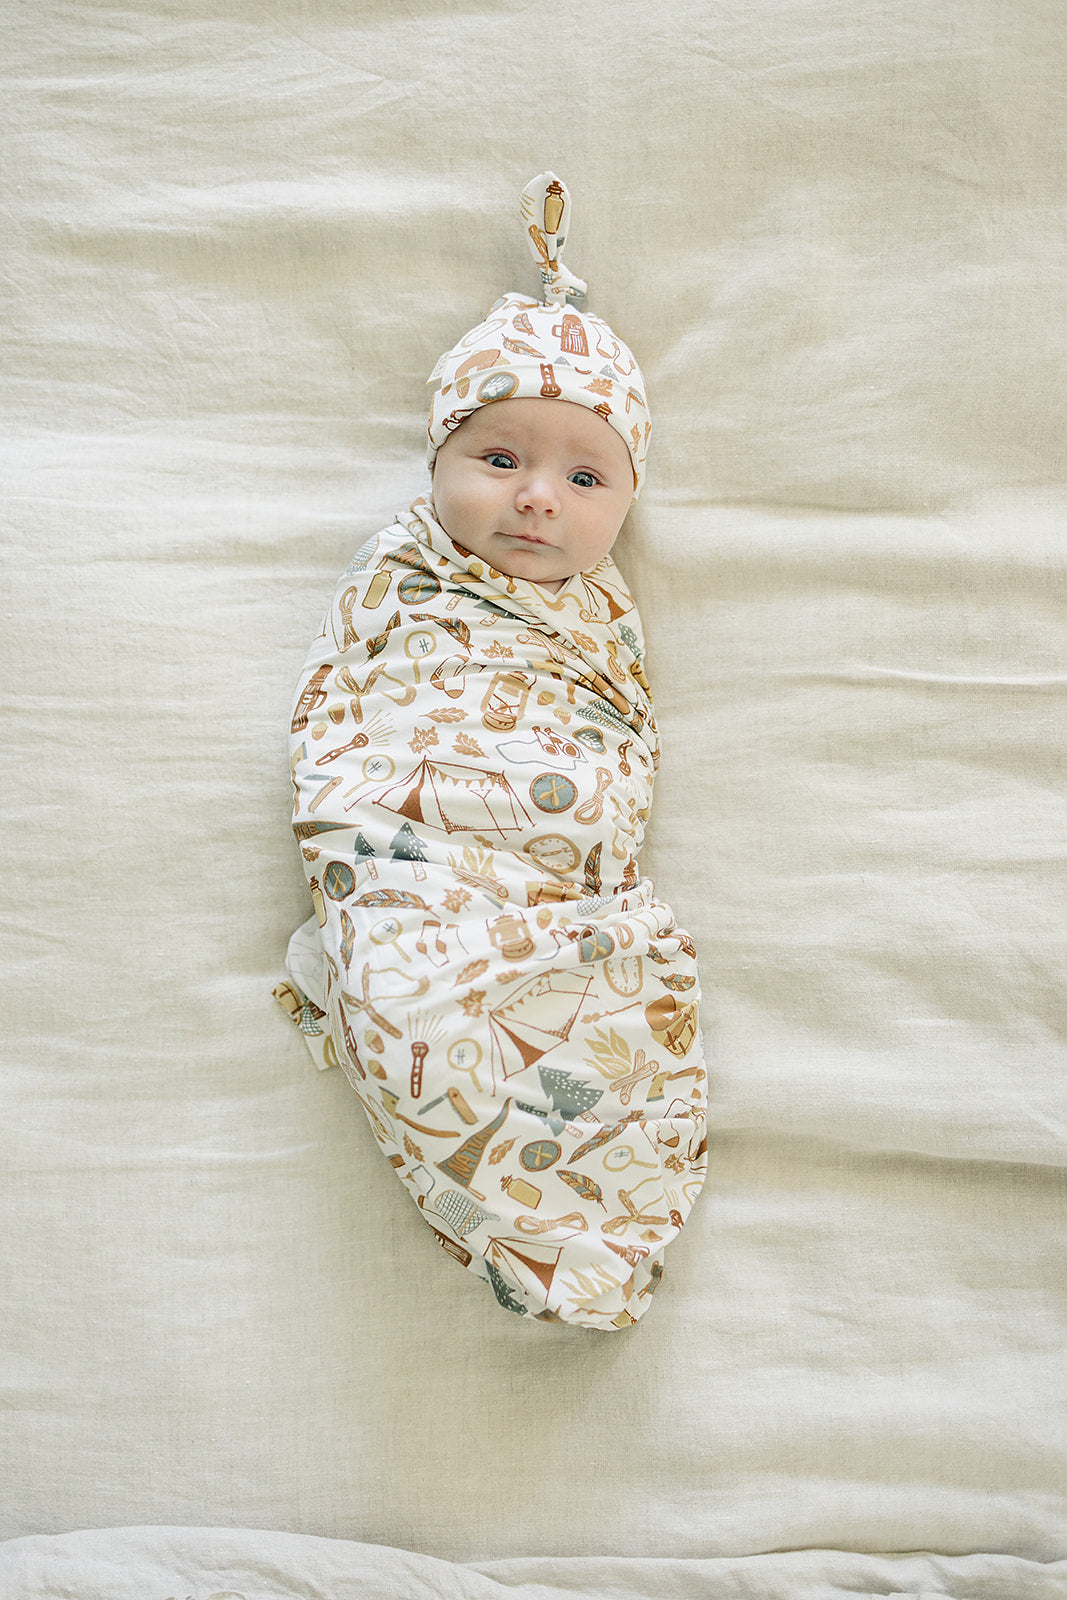 Camping Trip Bamboo Stretch Swaddle